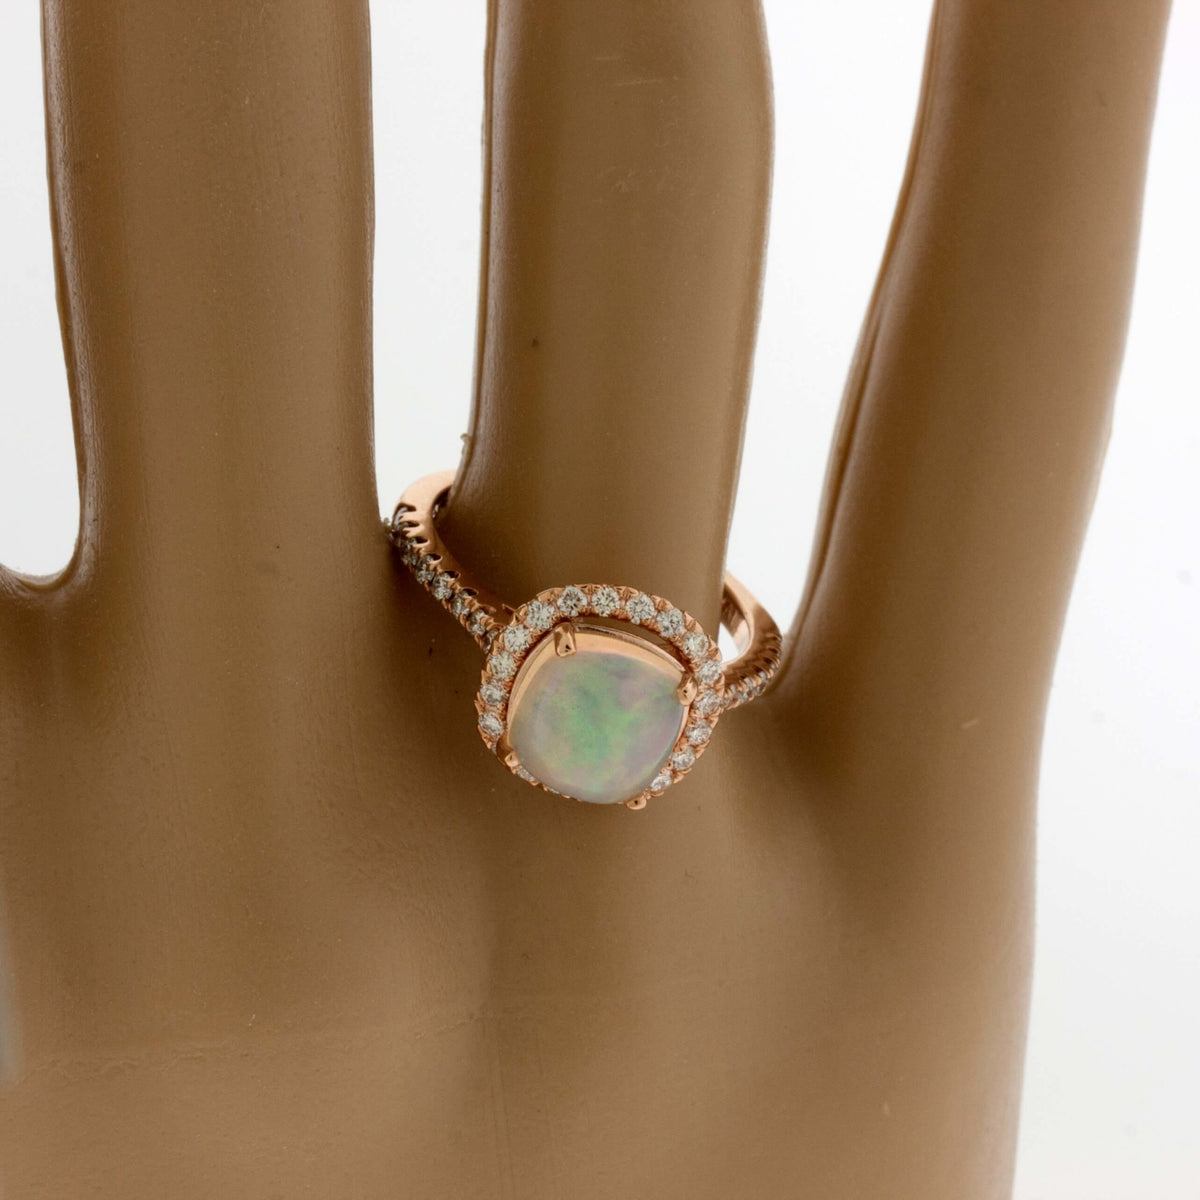 Cushion Cabochon Opal Ring with Diamond Halo - Park City Jewelers